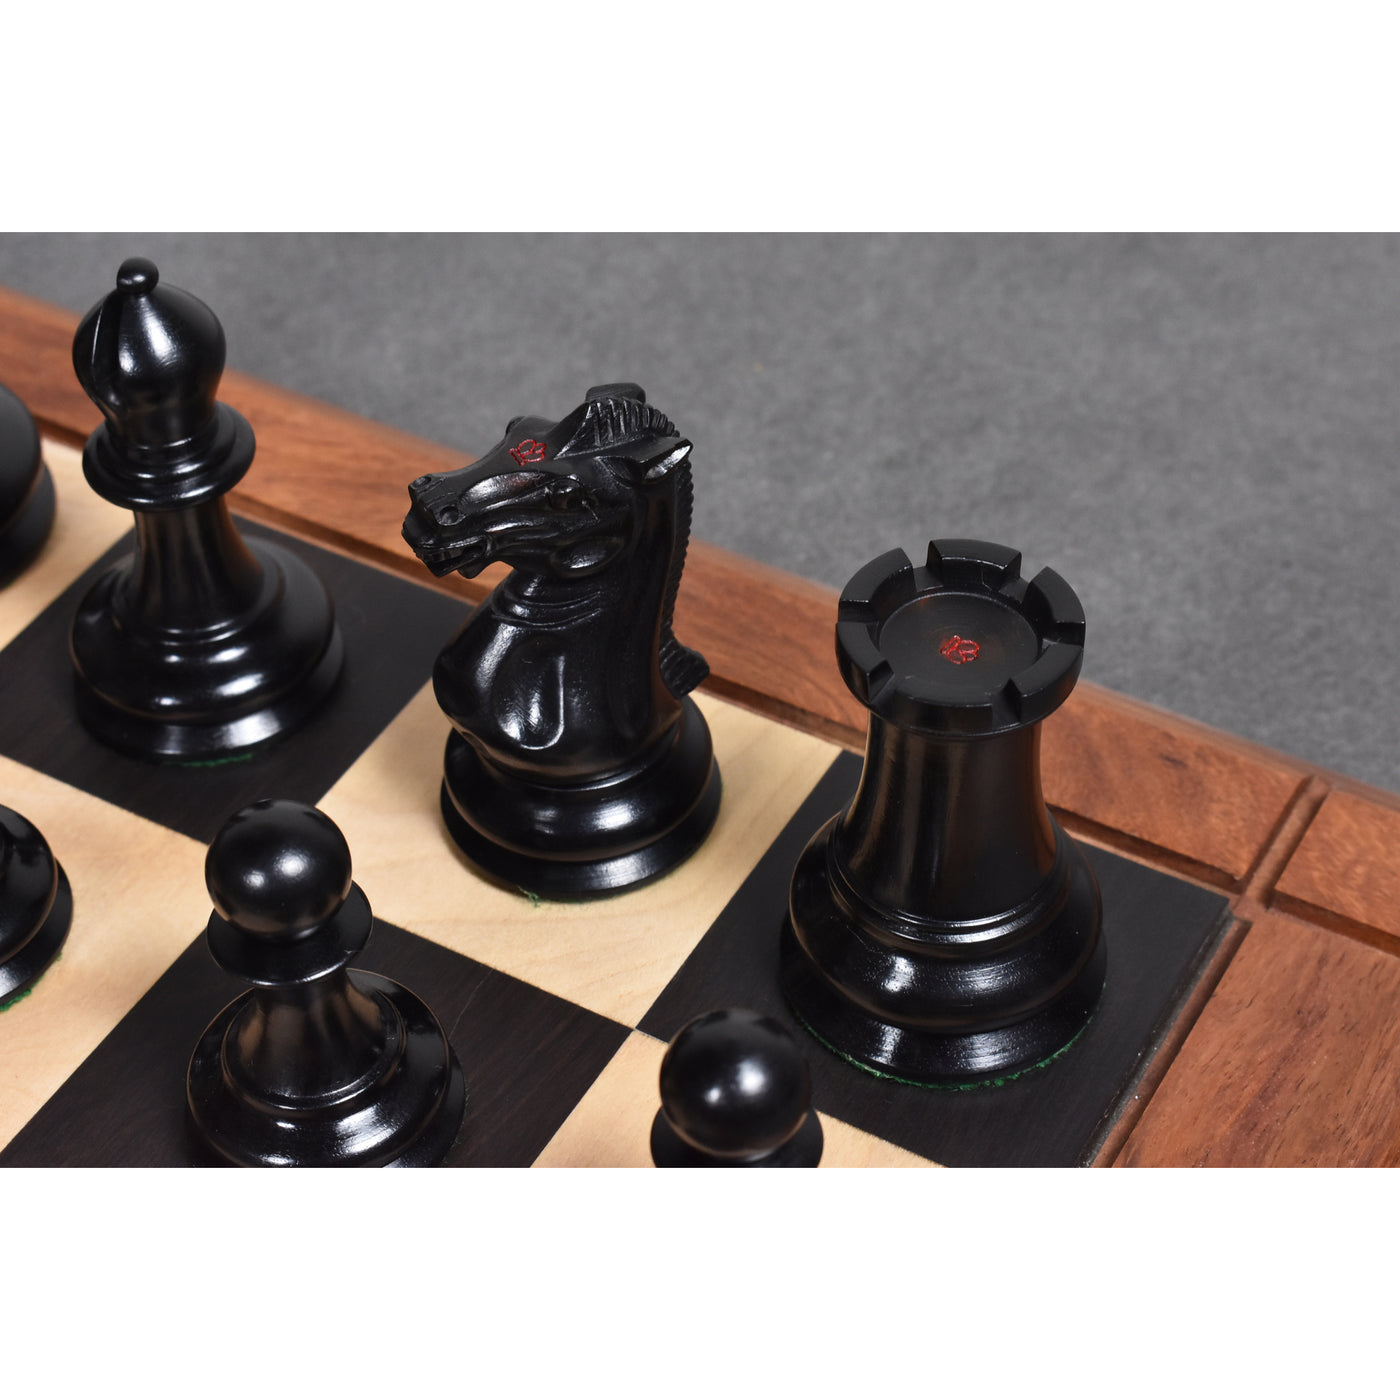 Slightly Imperfect 1849 Jacques Cook Staunton Chess Pieces Only Collectors set - Ebony Wood -3.75"